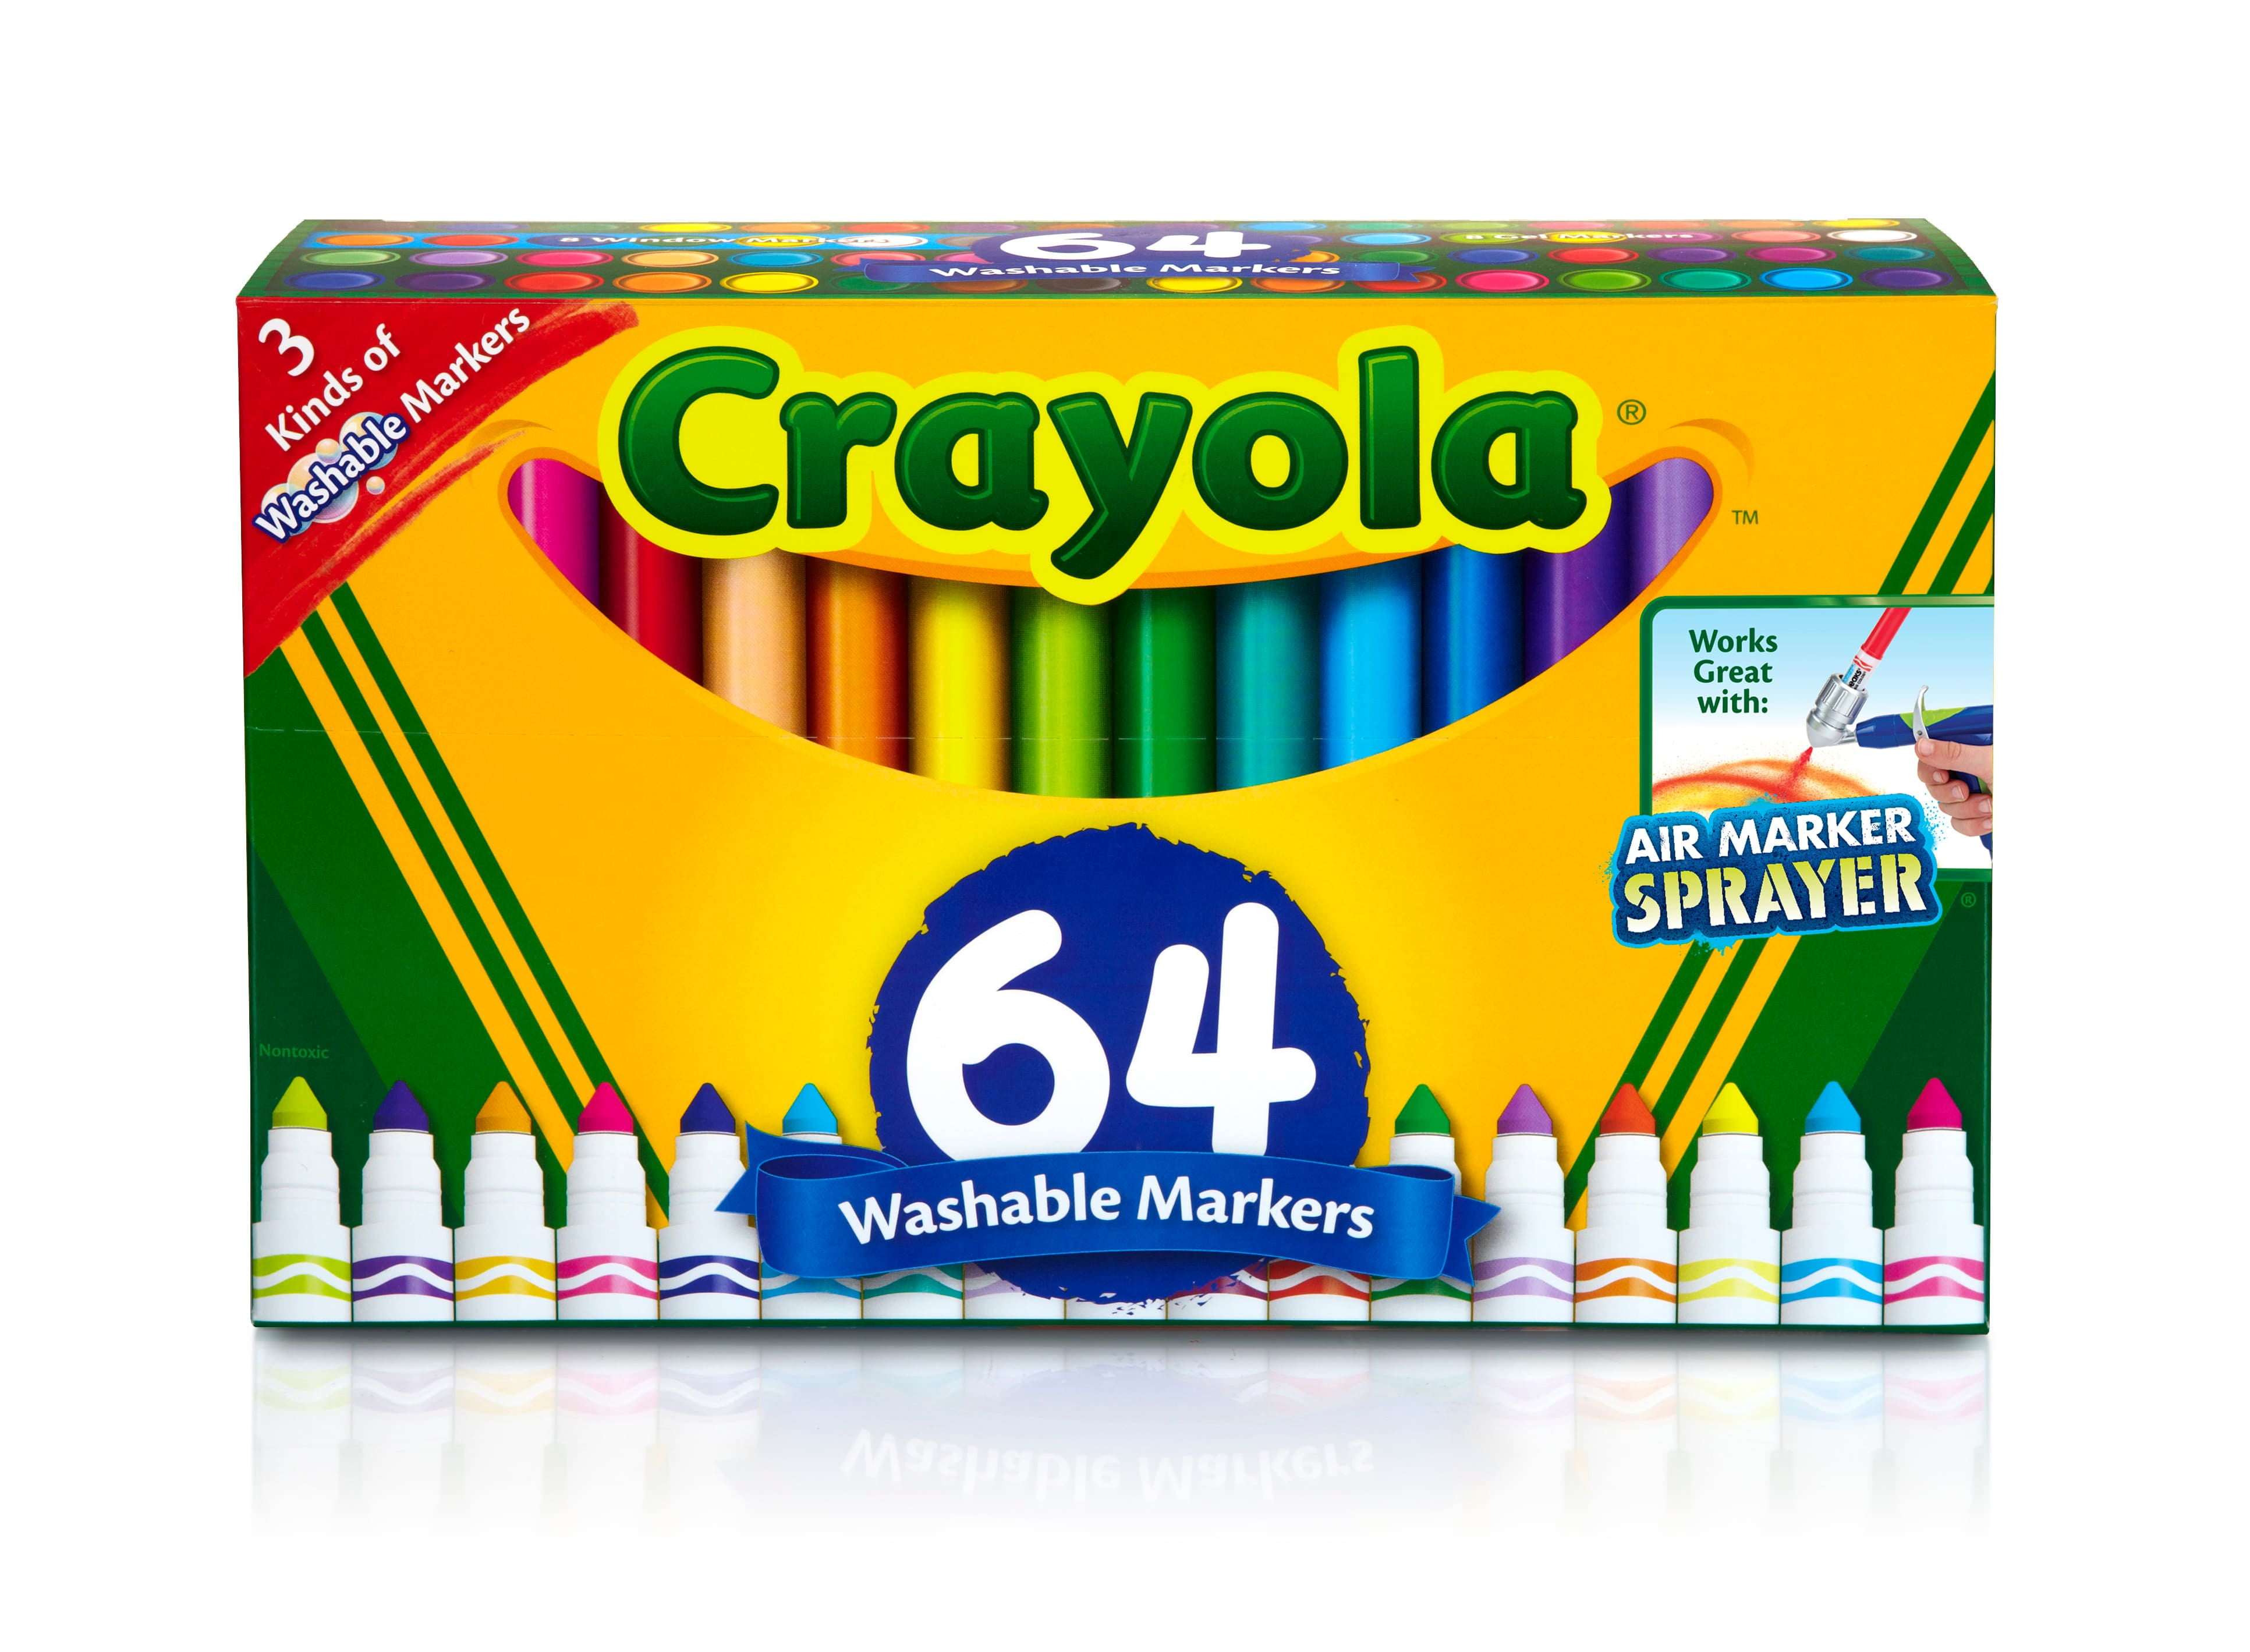 Crayola Fine Line Markers 8ct  The University Store on Fifth